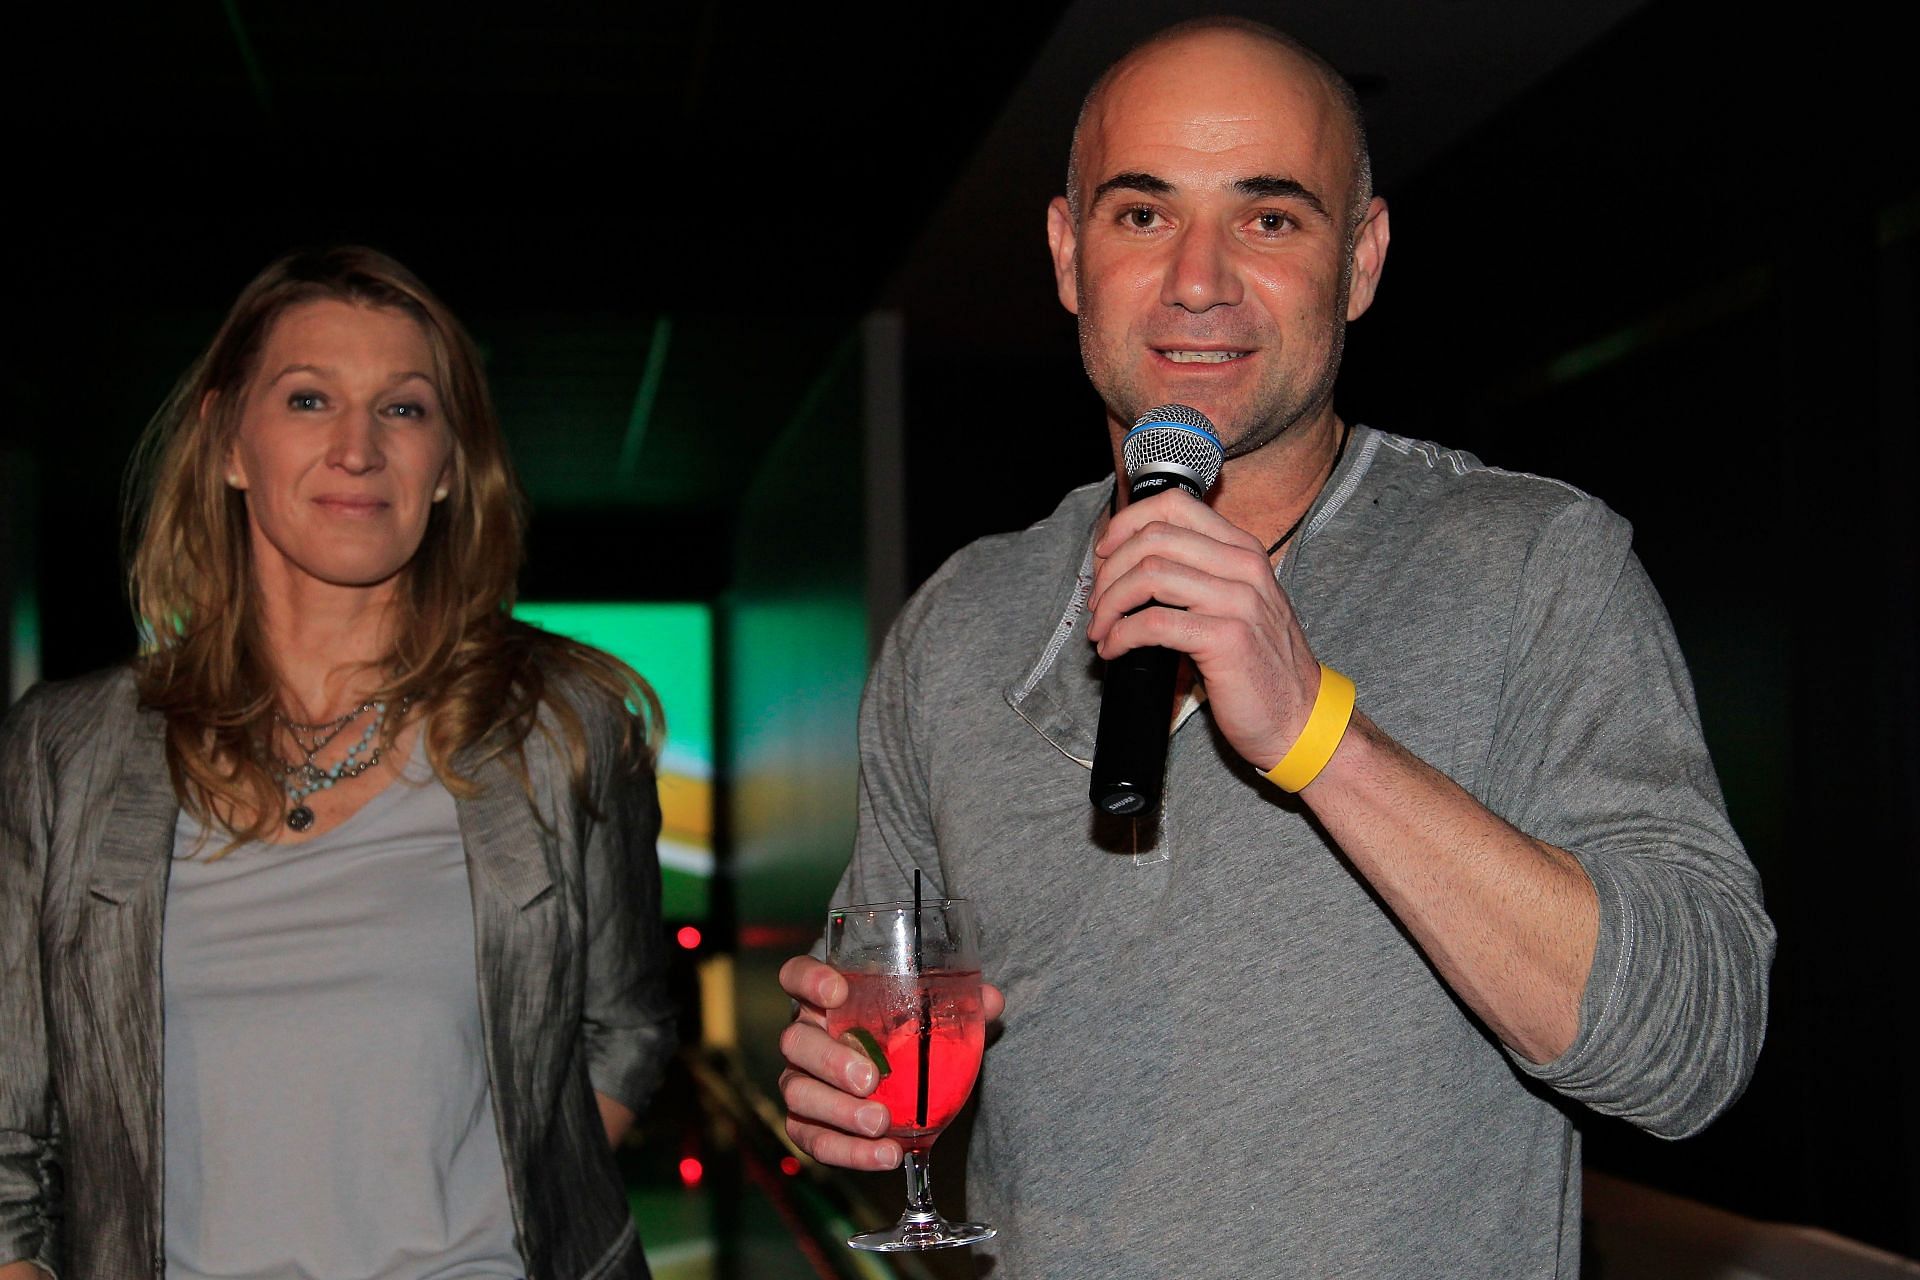 Tennis legends Andre Agassi (R) and Steffi Graf address the attendees of the 2011 NYC Tennisbowl at Bowlmor Lanes in New York City on February 26, 2011 in New York City - Getty Images